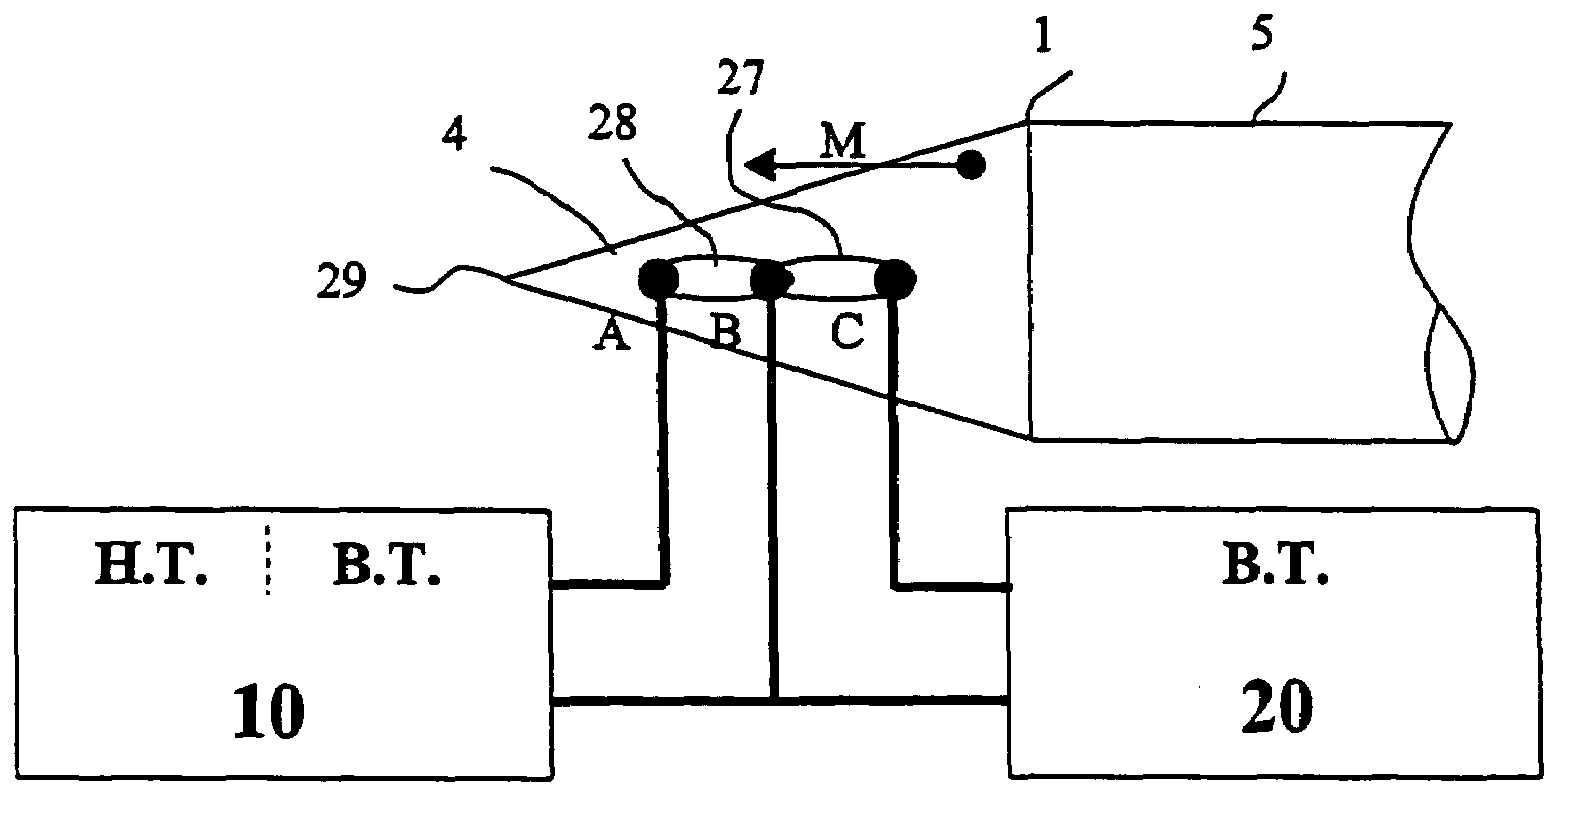 Low voltage device for the generation of plasma discharge to operate a supersonic or hypersonic apparatus